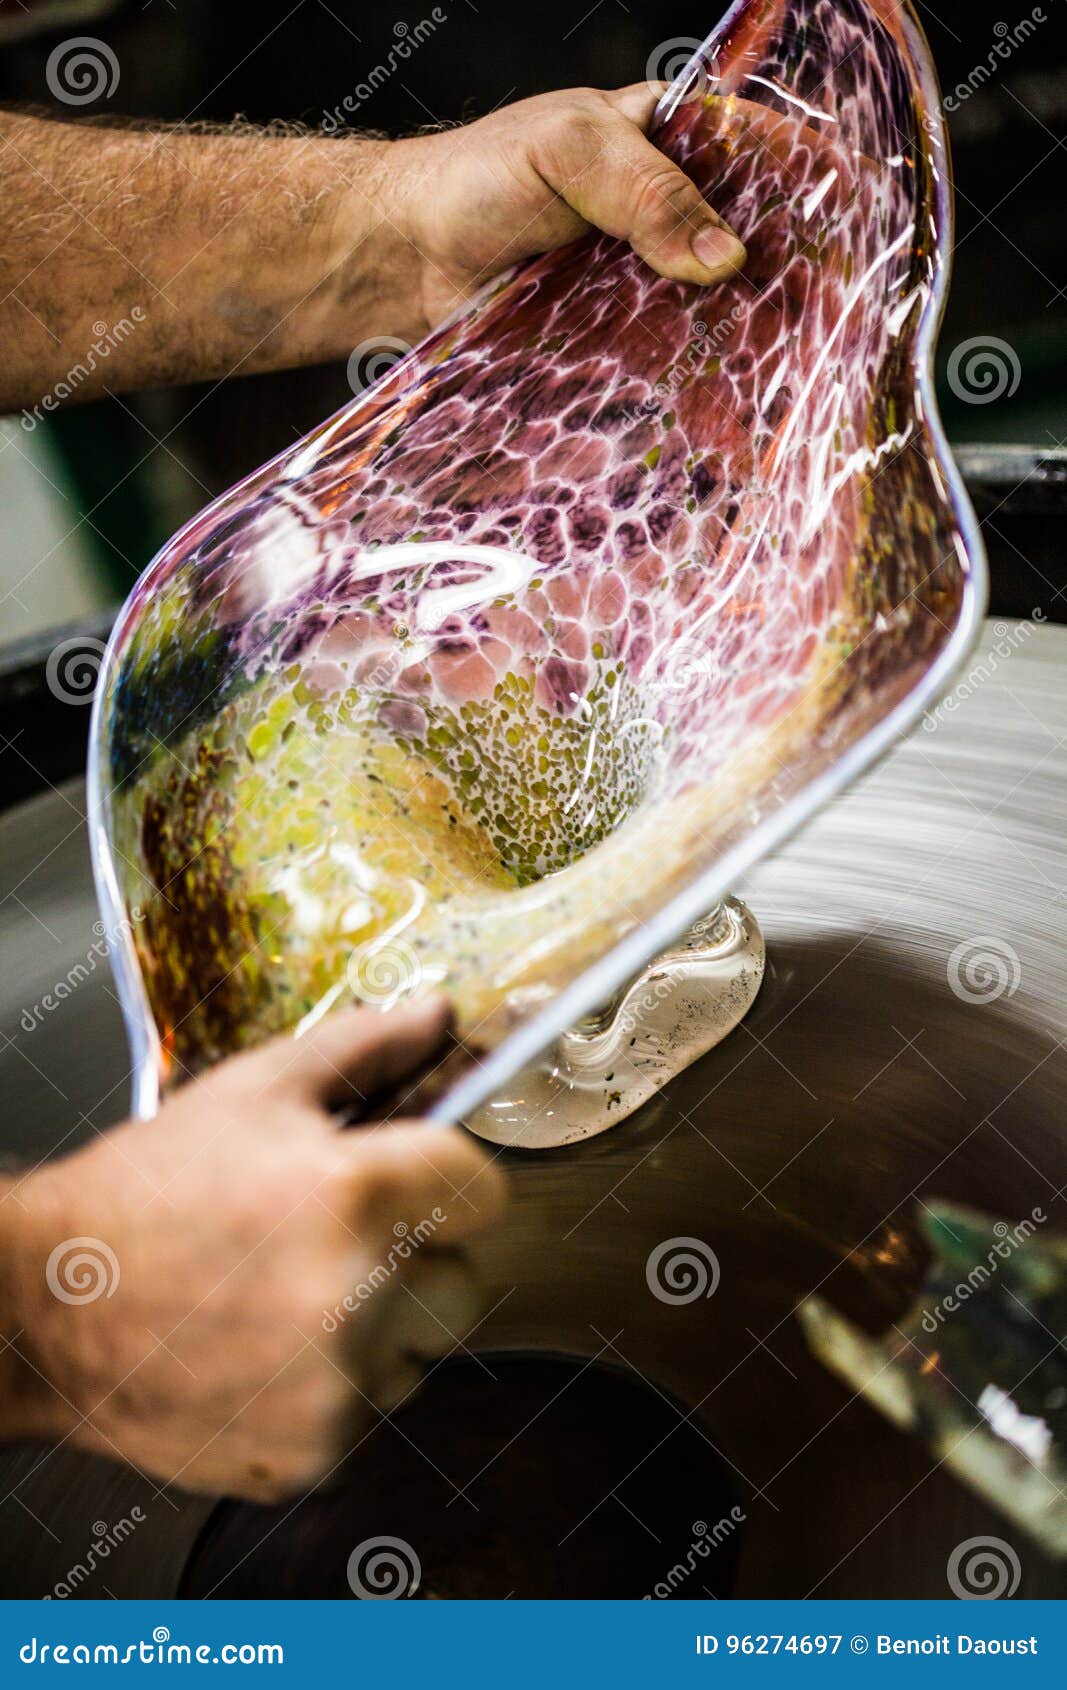 man working a glass blown vase on spinning silica sanding disk